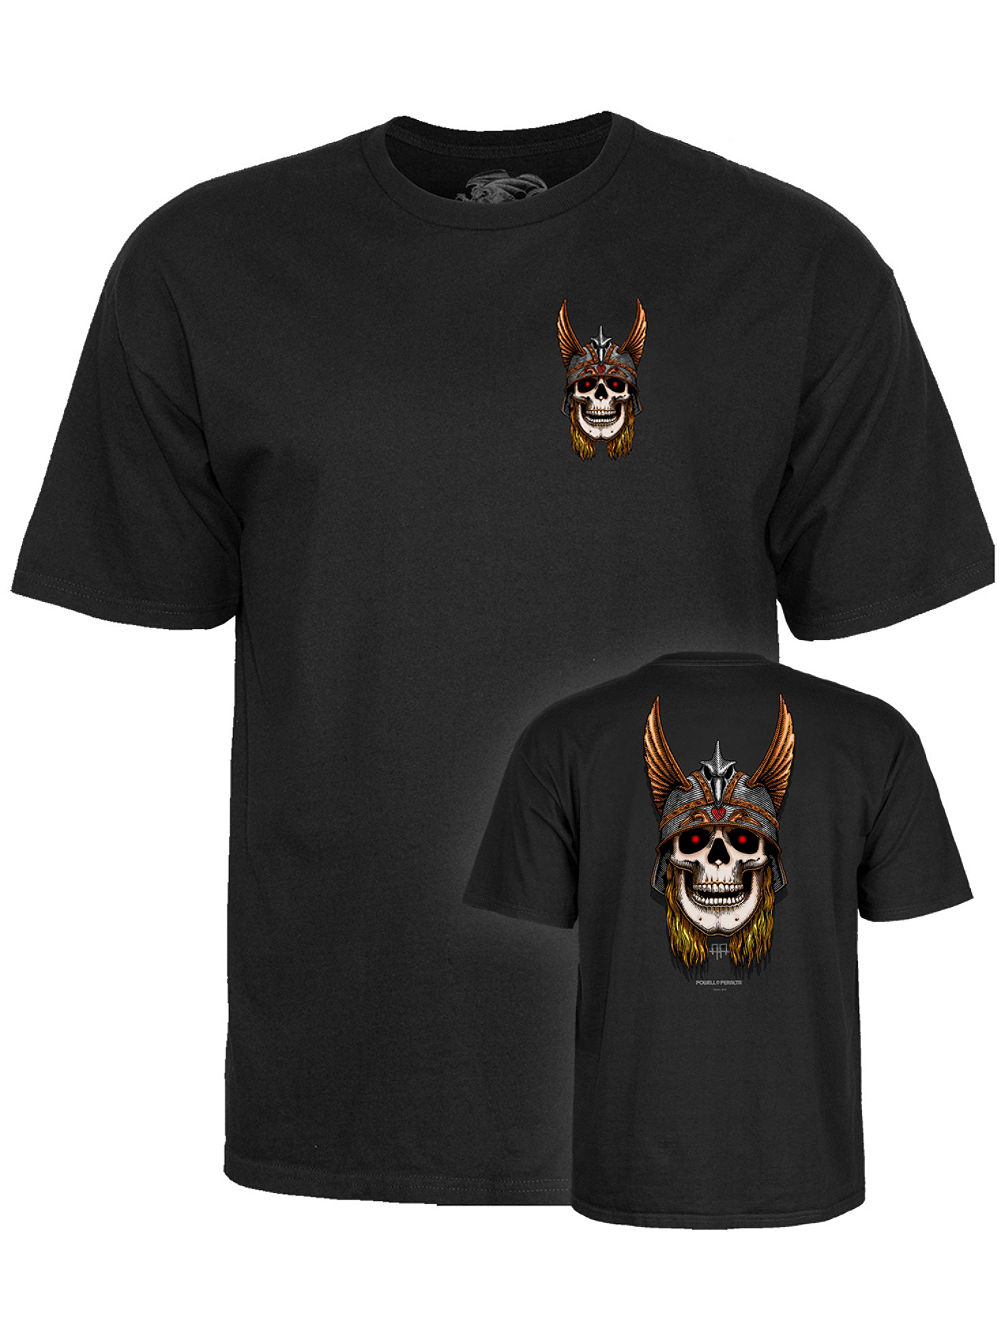 Andy Anderson Skull T-shirt